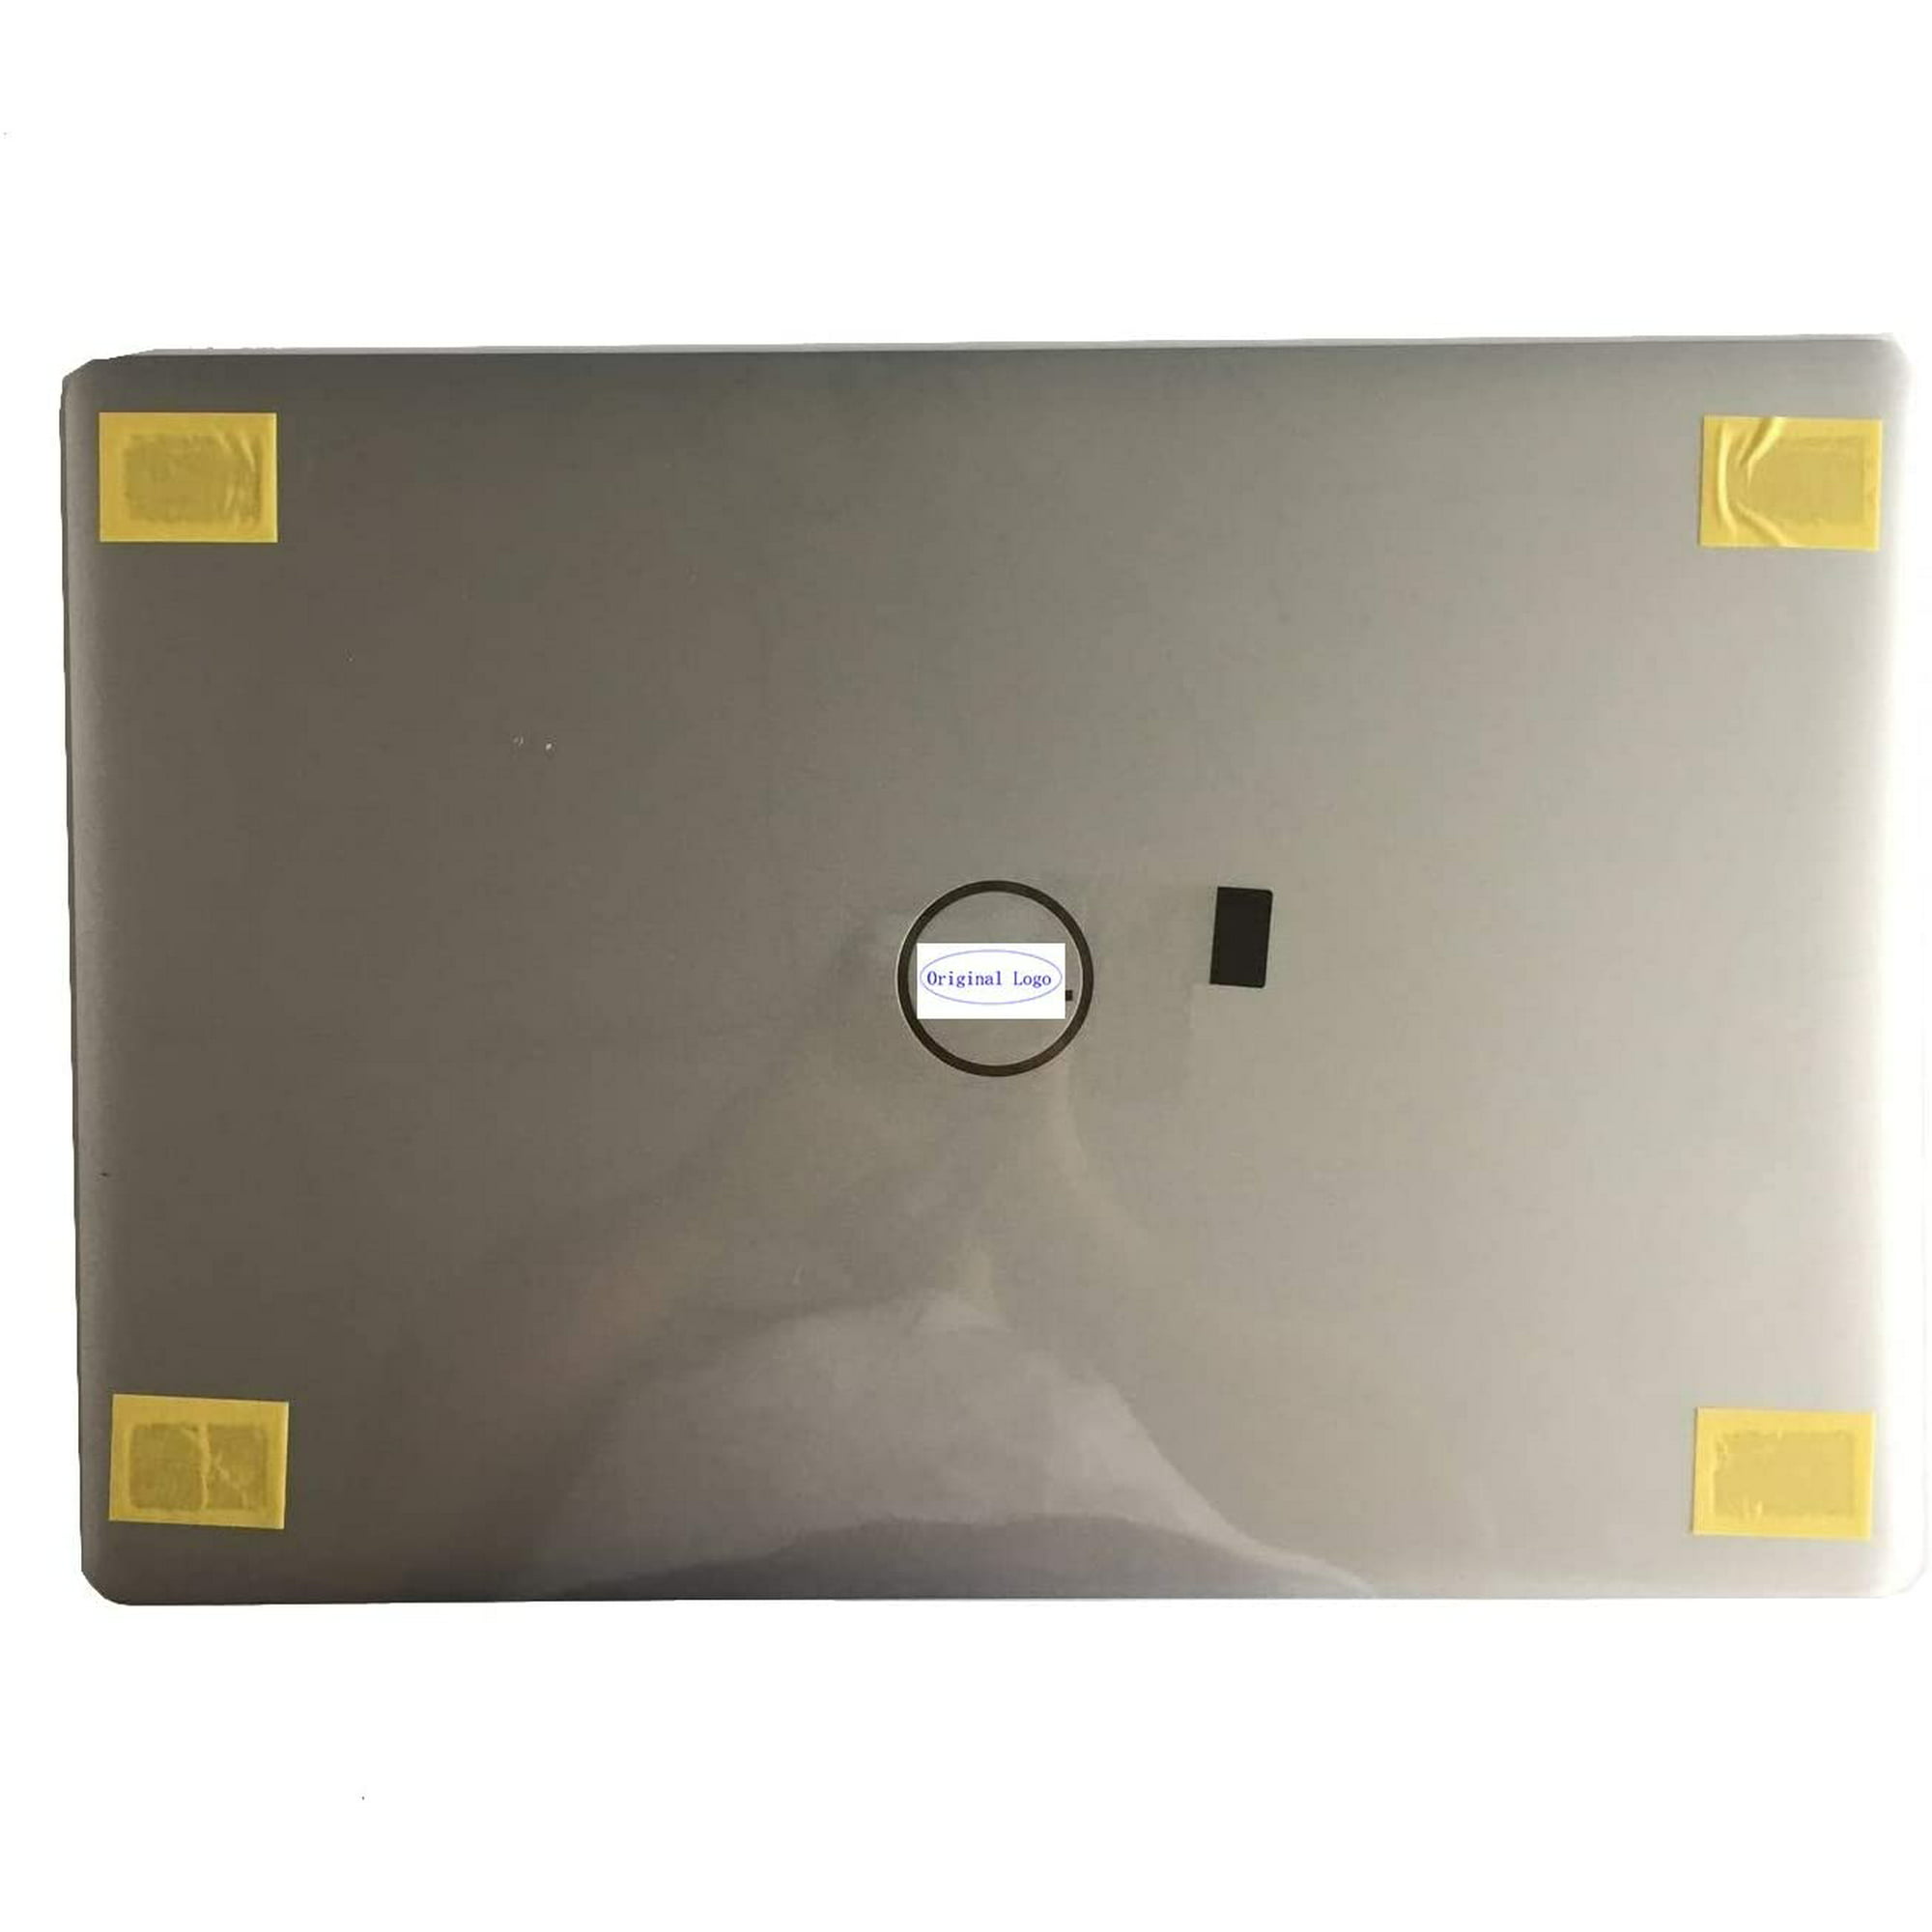 New Replacement for Dell Inspiron 15 5000 5570 Laptop LCD Cover Back Rear Top Lid 0X4FTD X4FTD Silver